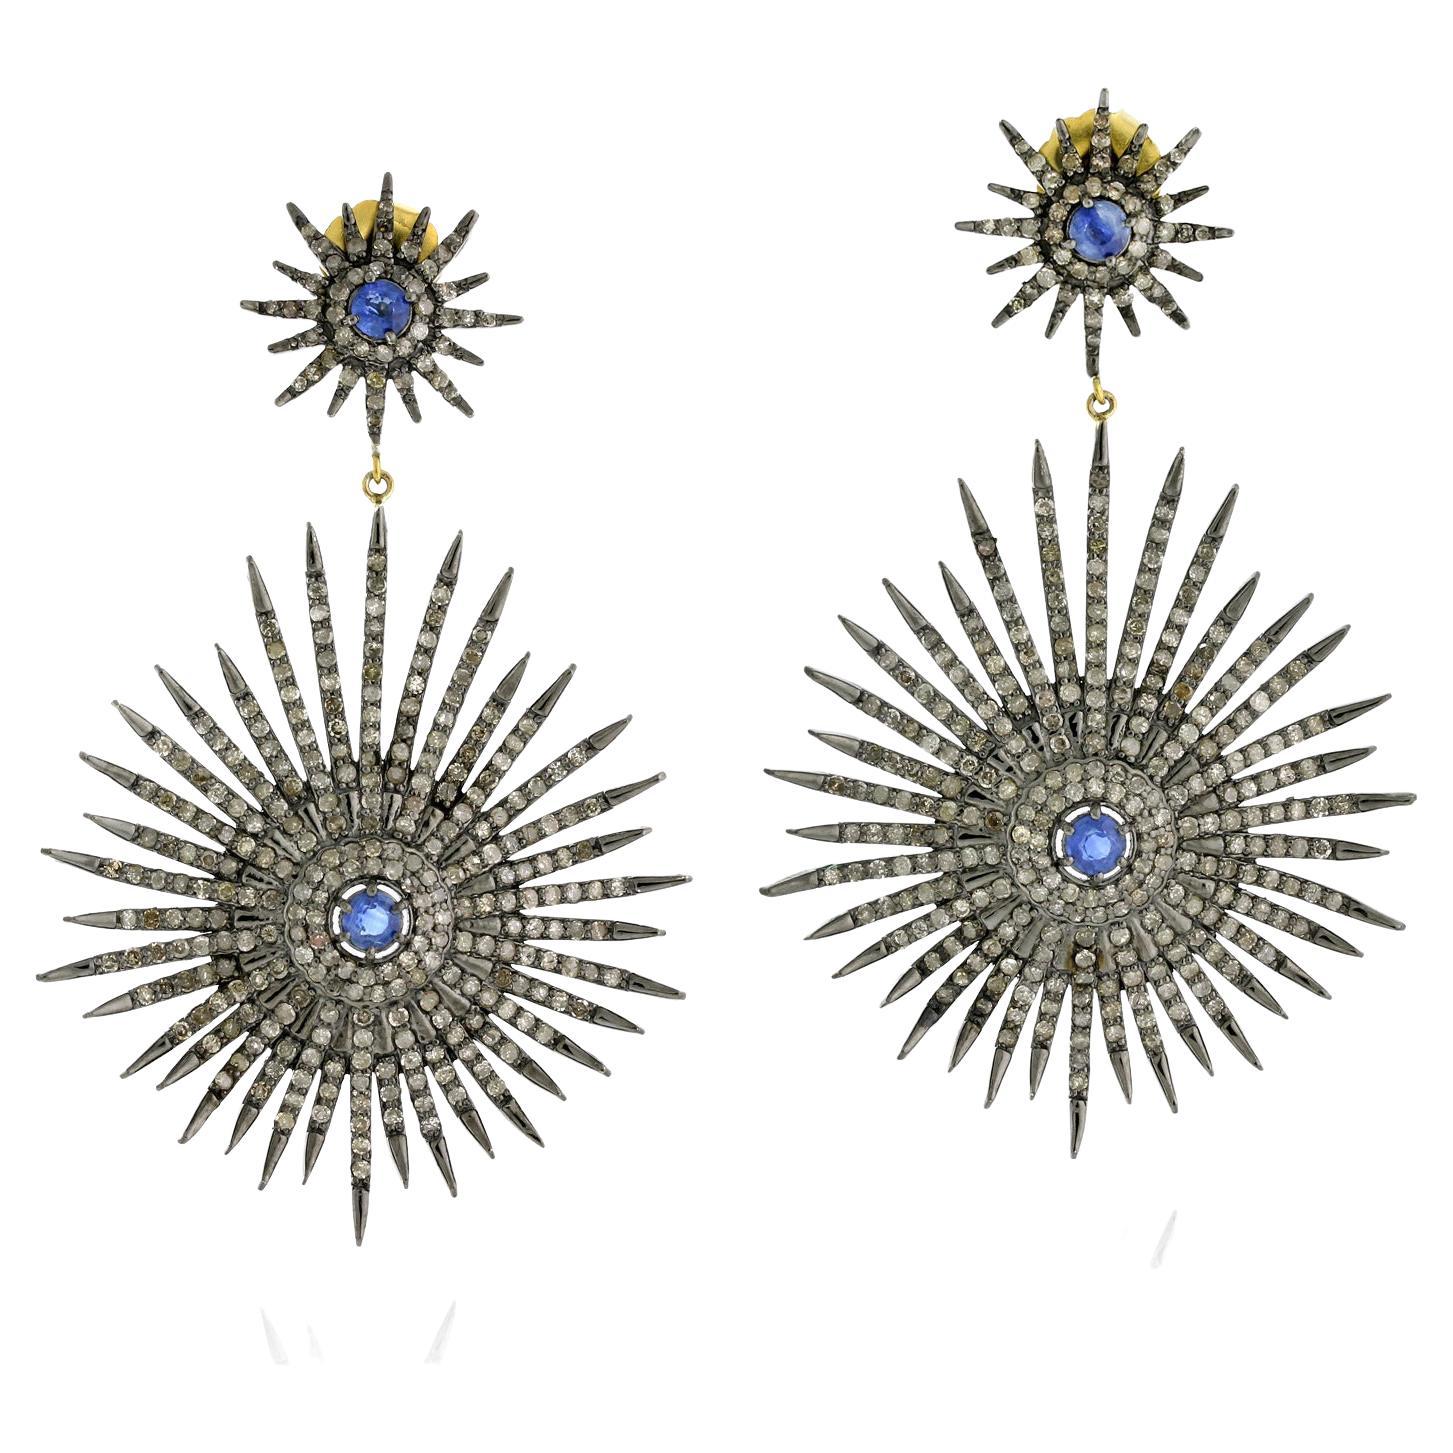 Starburst Earrings with Kyanite & Pave Diamonds Made in 14k Gold & Silver For Sale